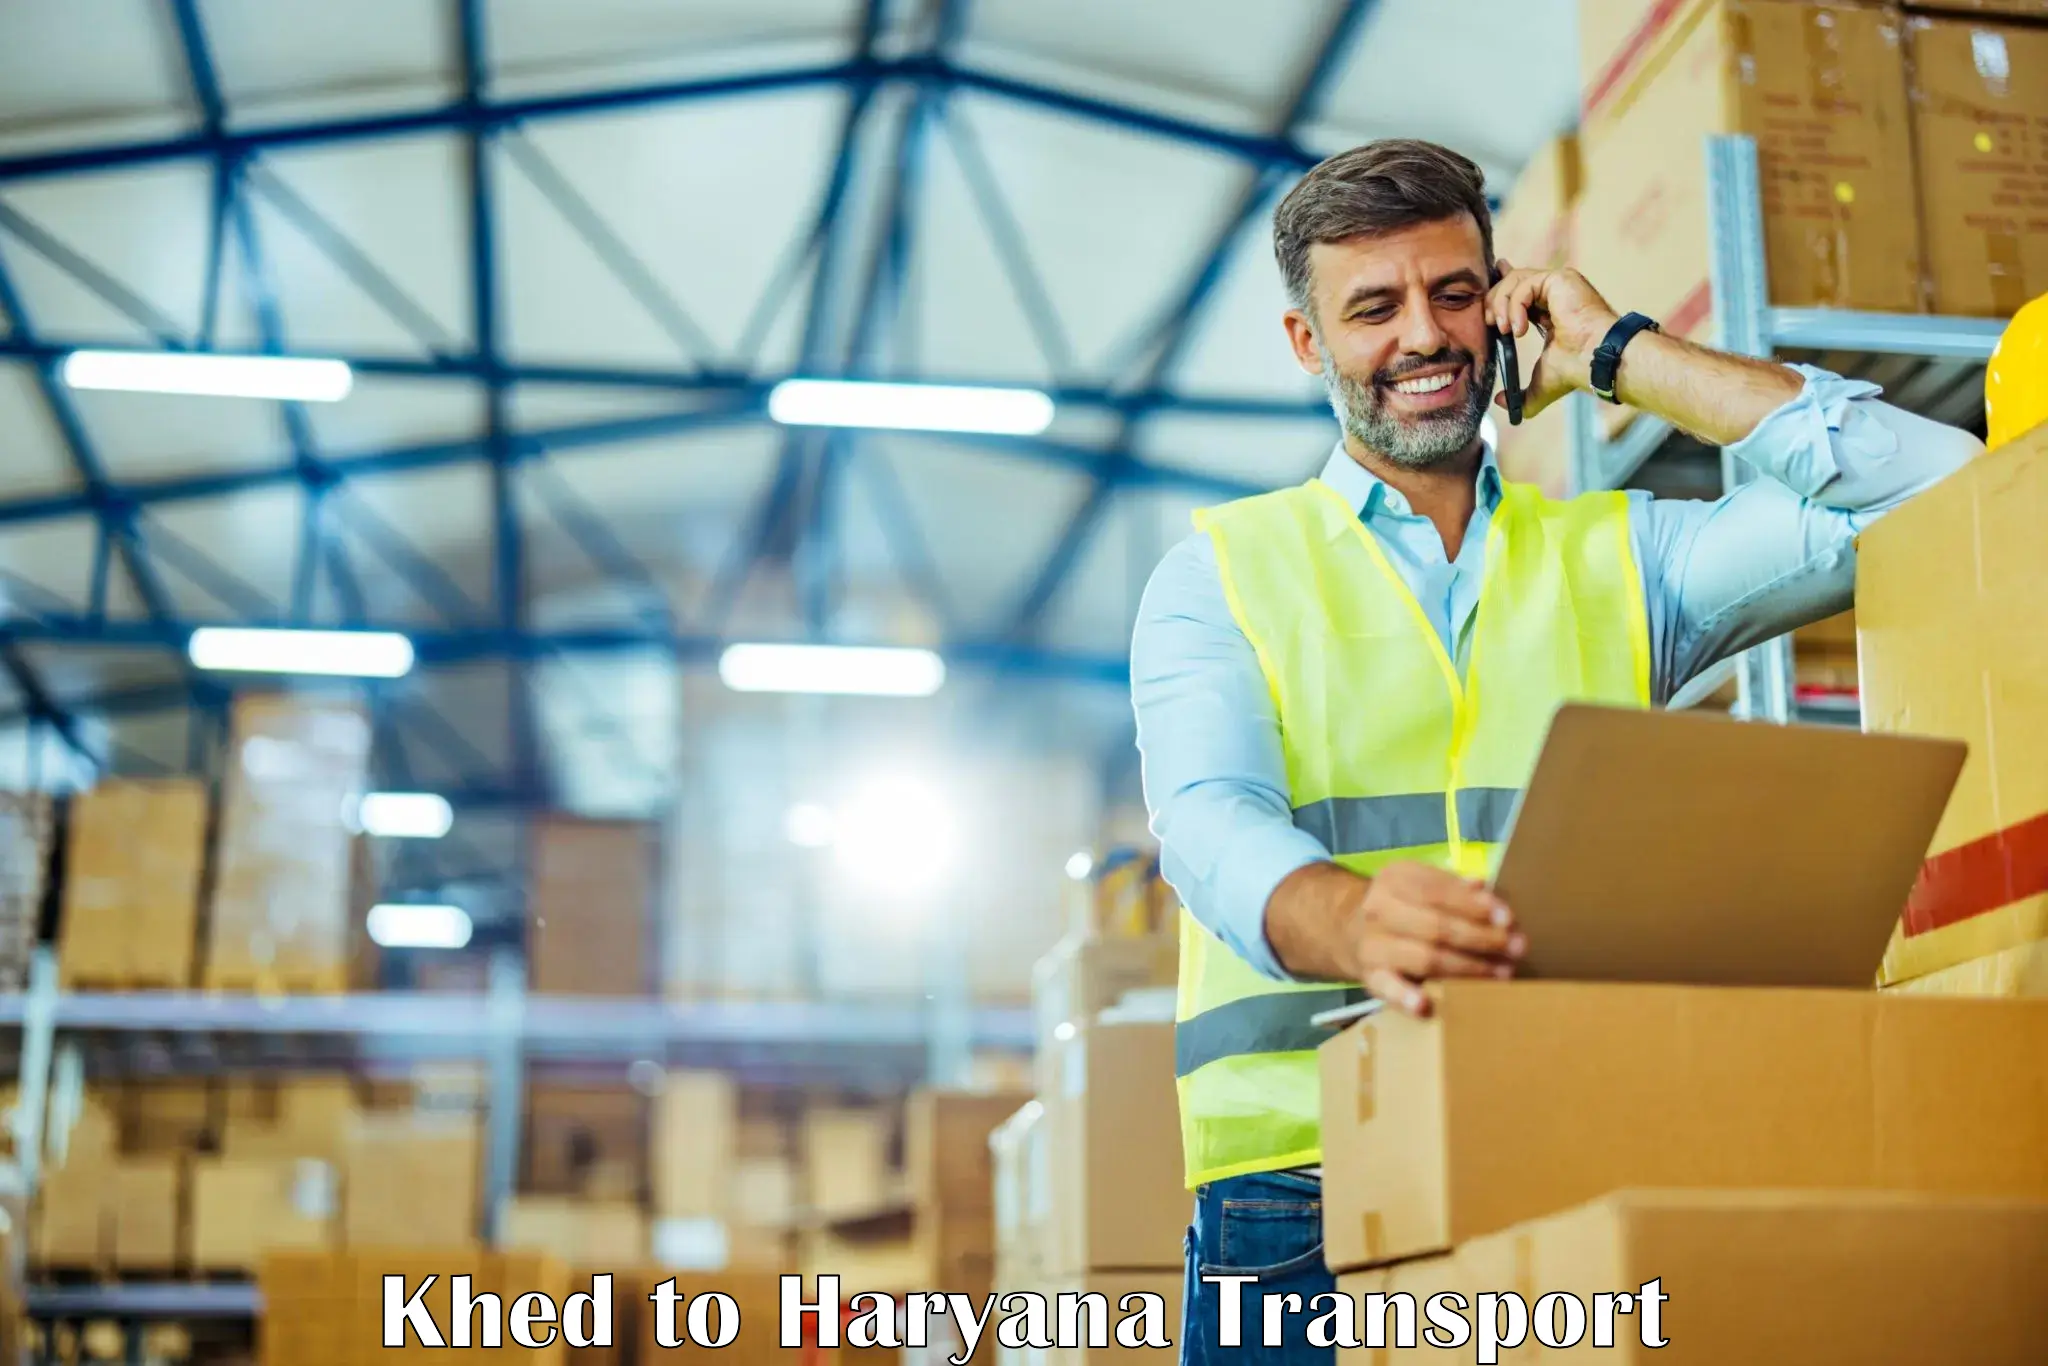 Nationwide transport services Khed to Charkhari